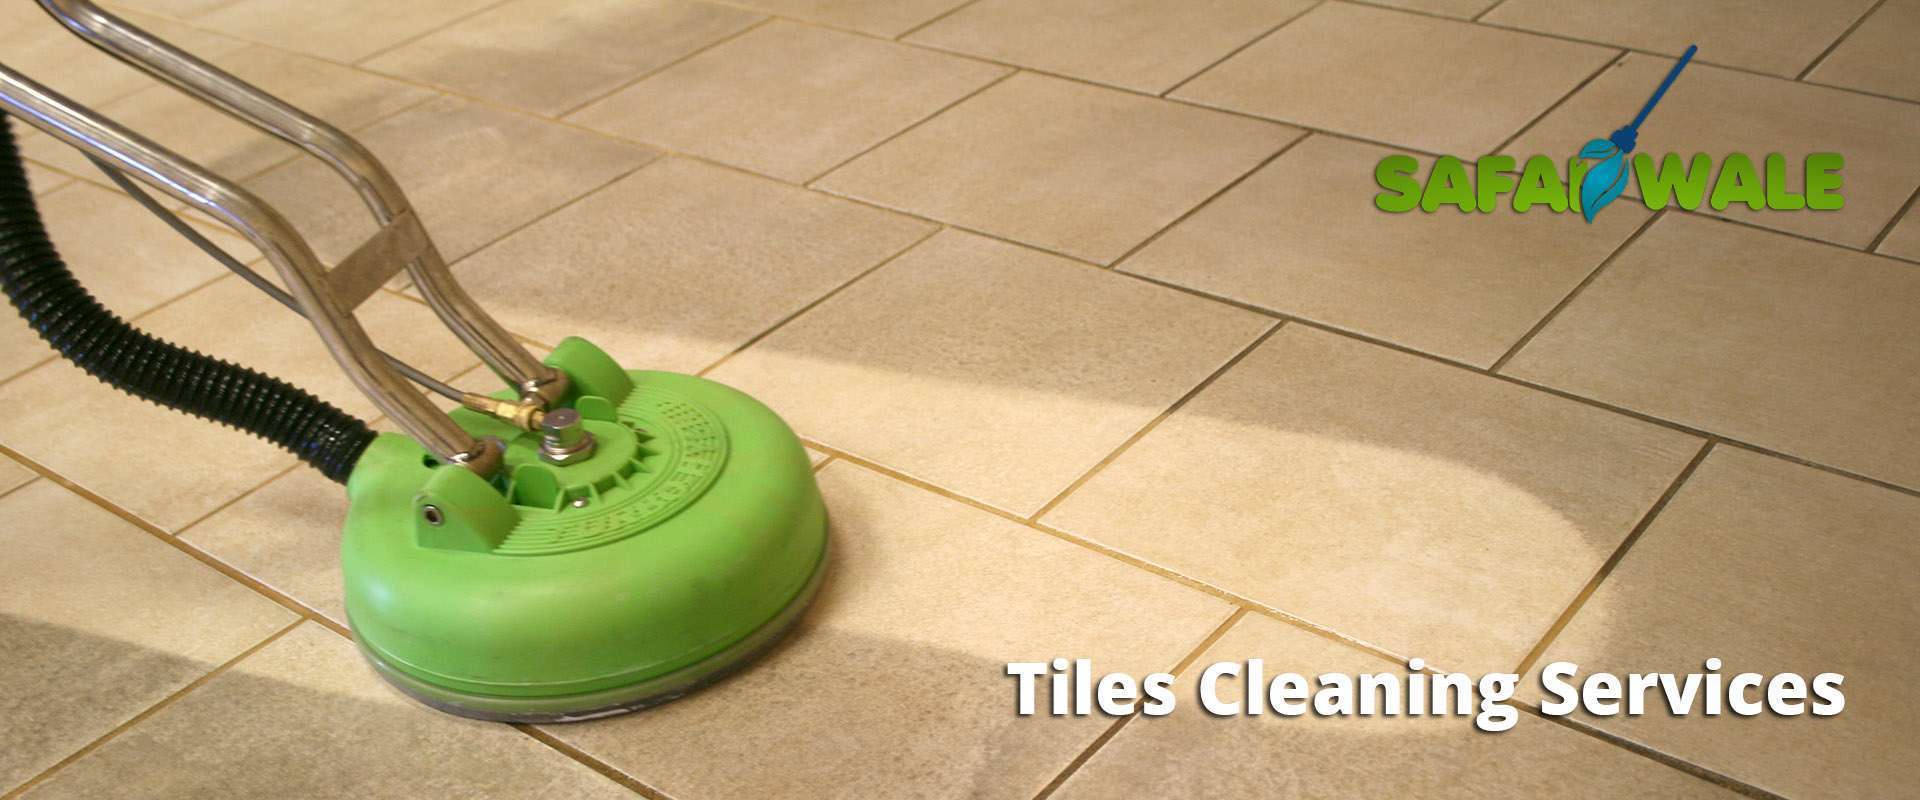 Tiles Cleaning Services In Kanpur